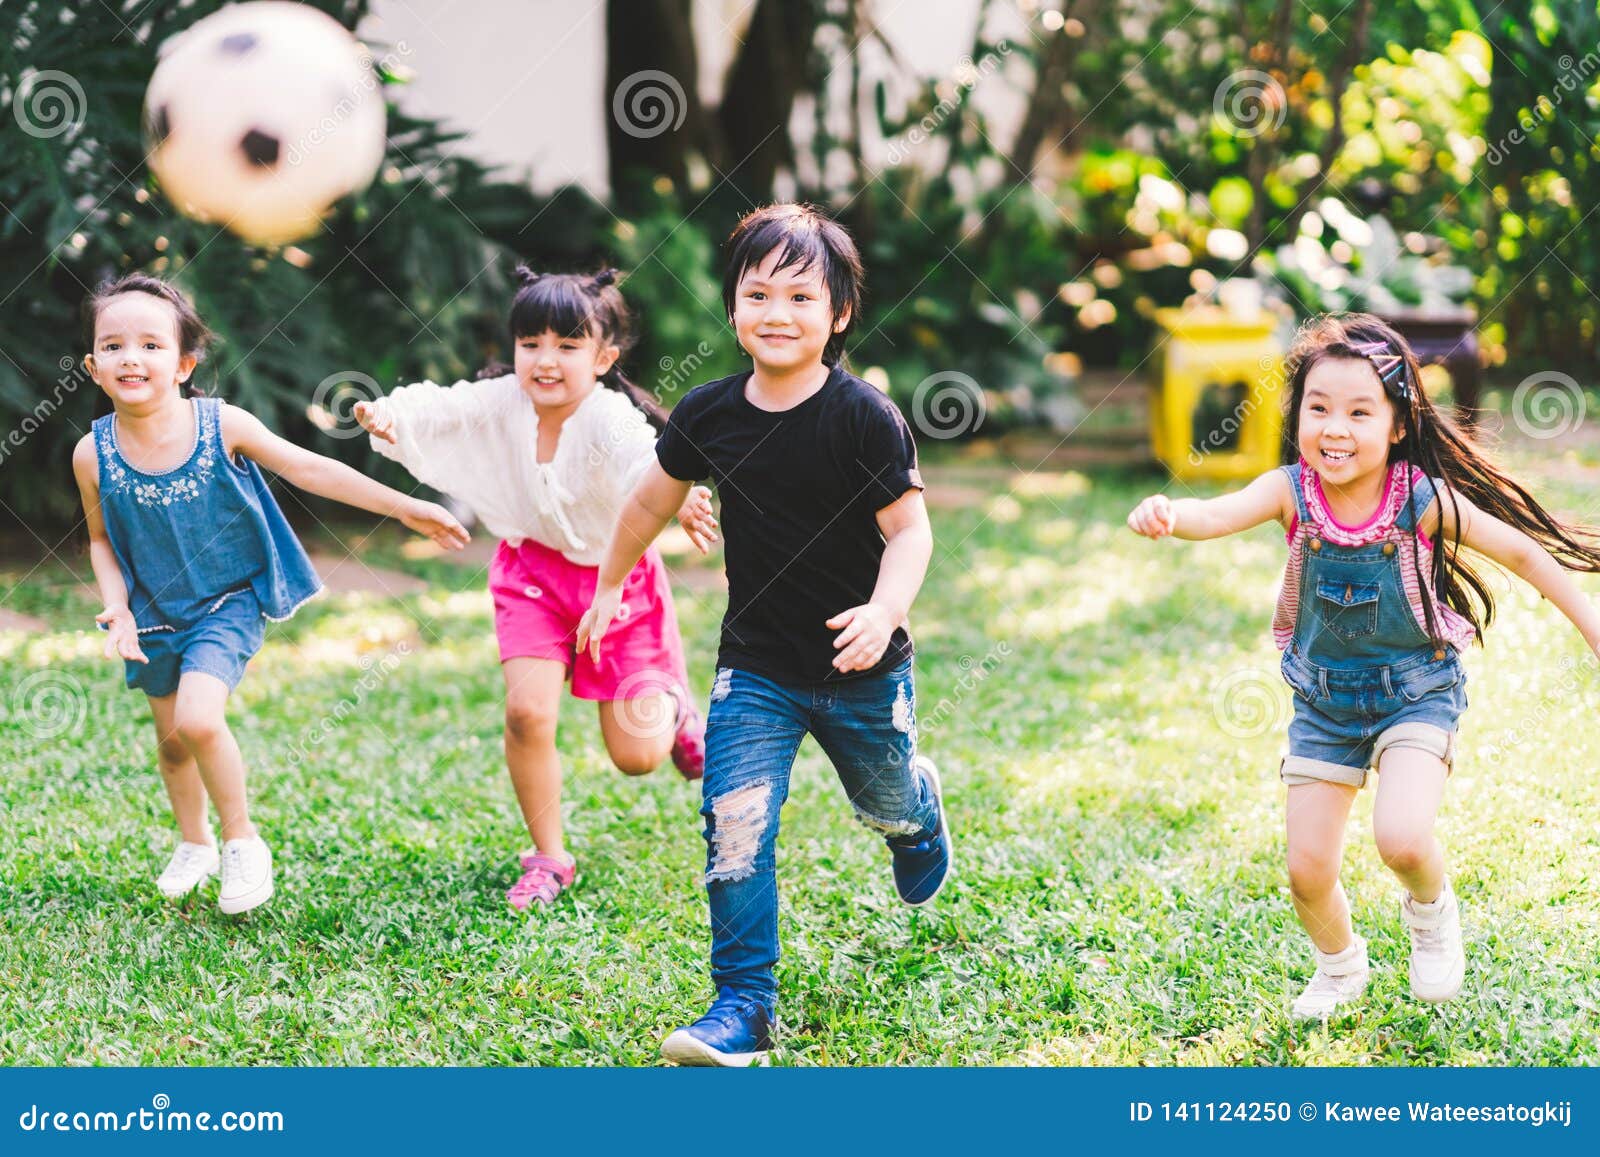 asian and mixed race happy young kids running playing football together in garden. multi-ethnic children group, outdoor exercising